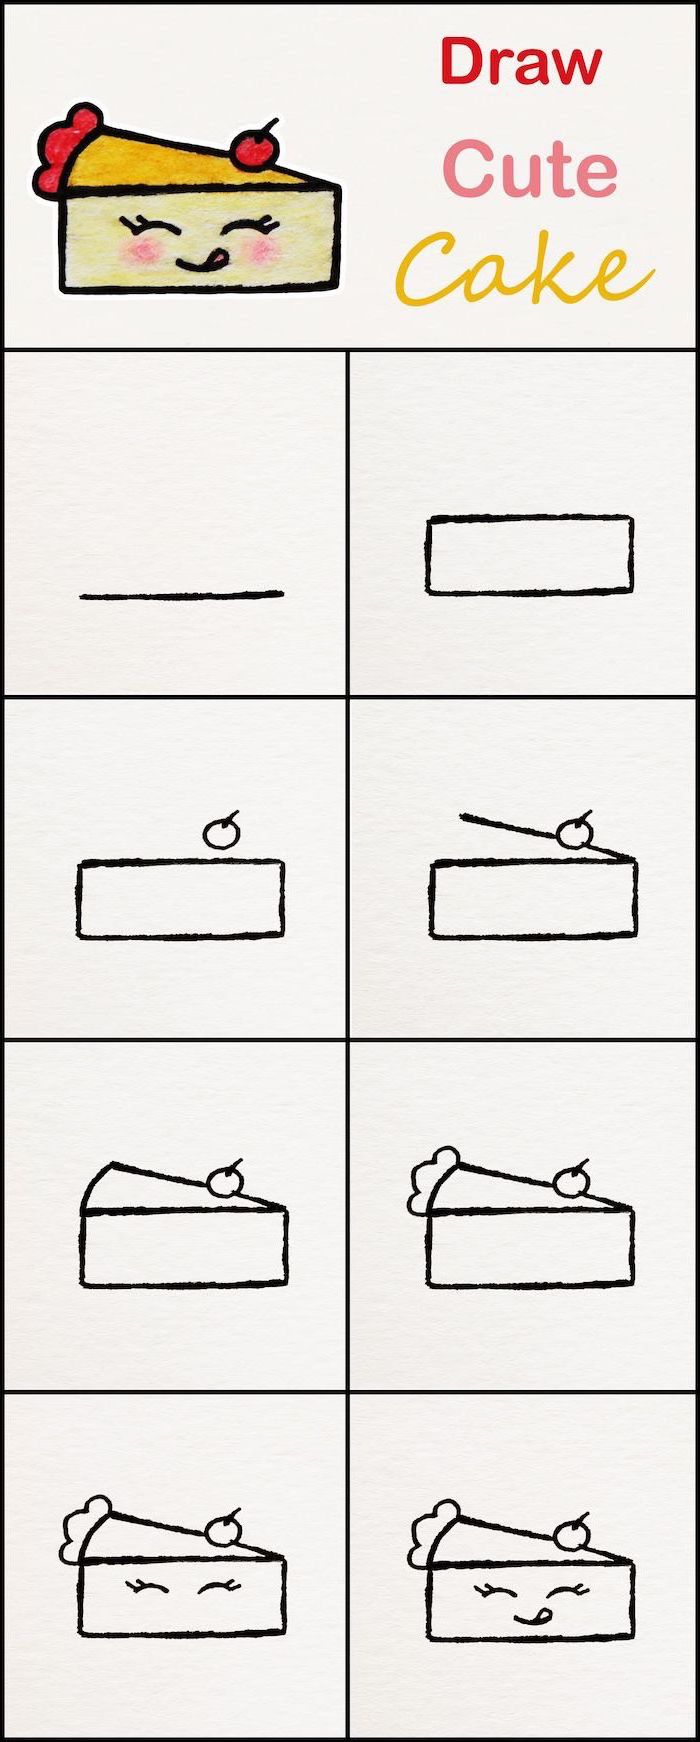 how to draw a cake slice, cool easy drawings, step by step diy tutorial, sketch on white background